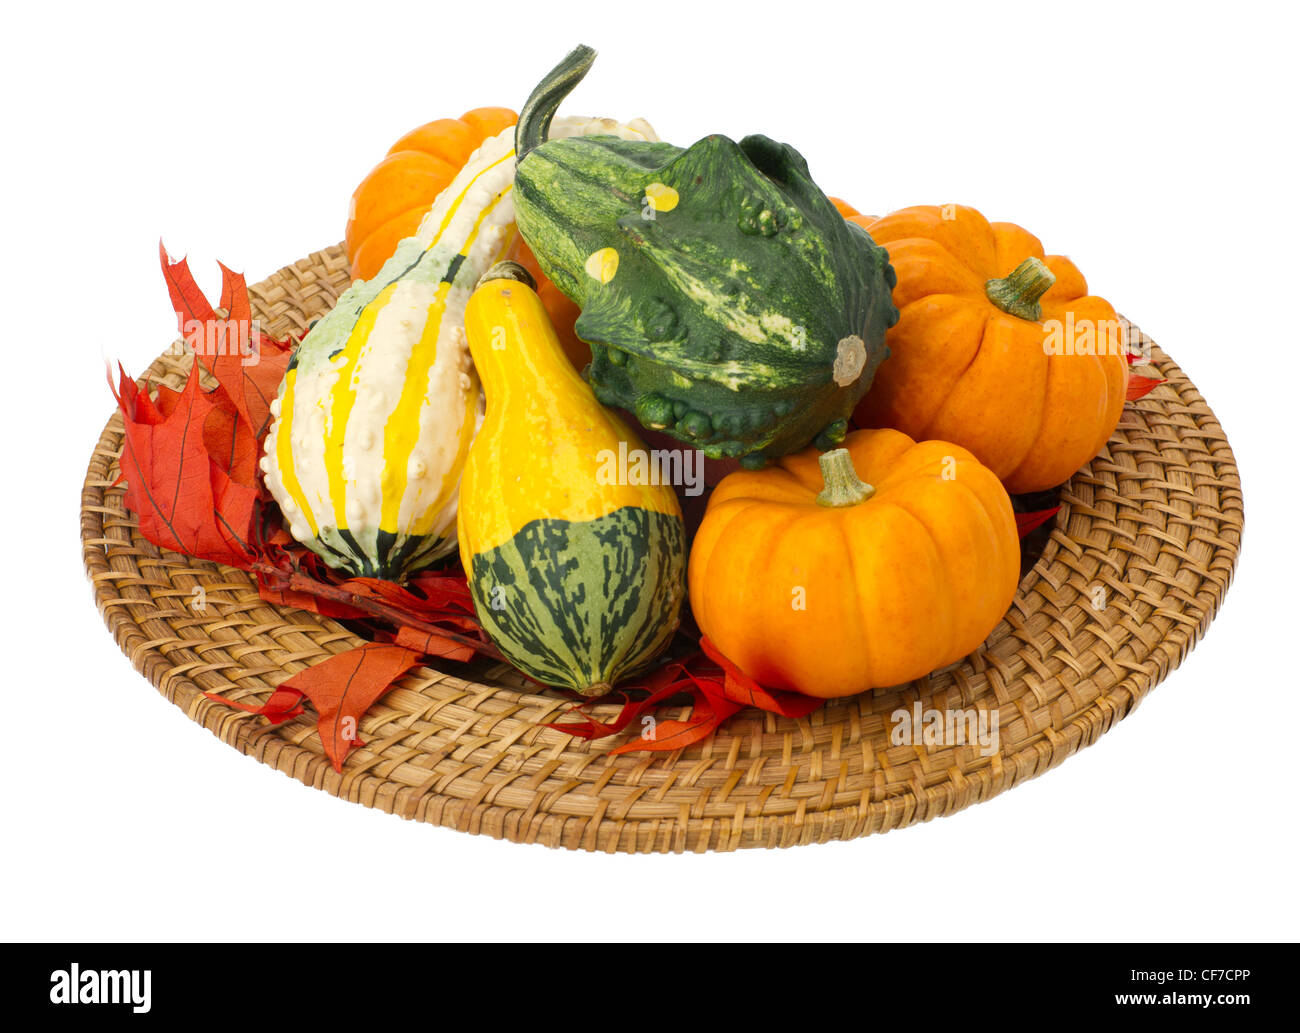 Colorful arrangement of fall leaves and decorative gourds on a wicker tray isolated on white Stock Photo